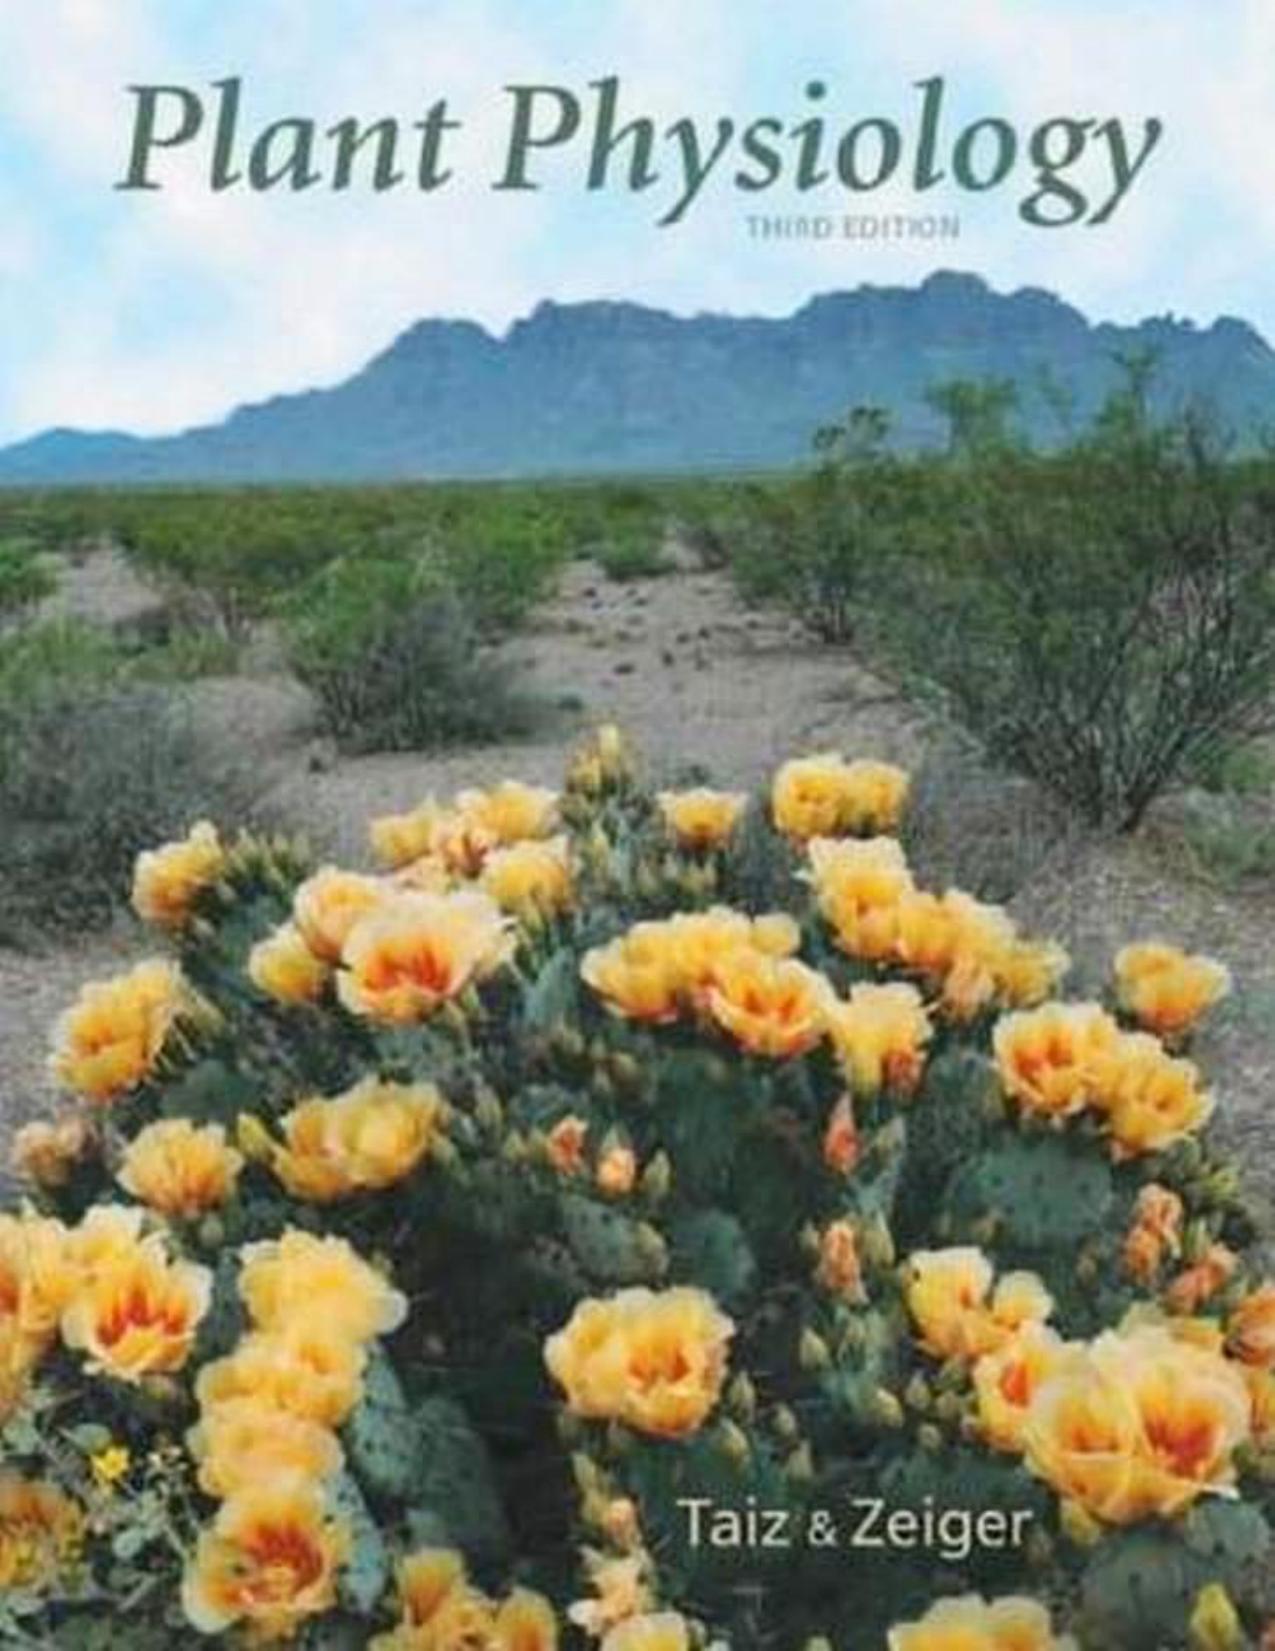 Plant Physiology 3rd edition 2002